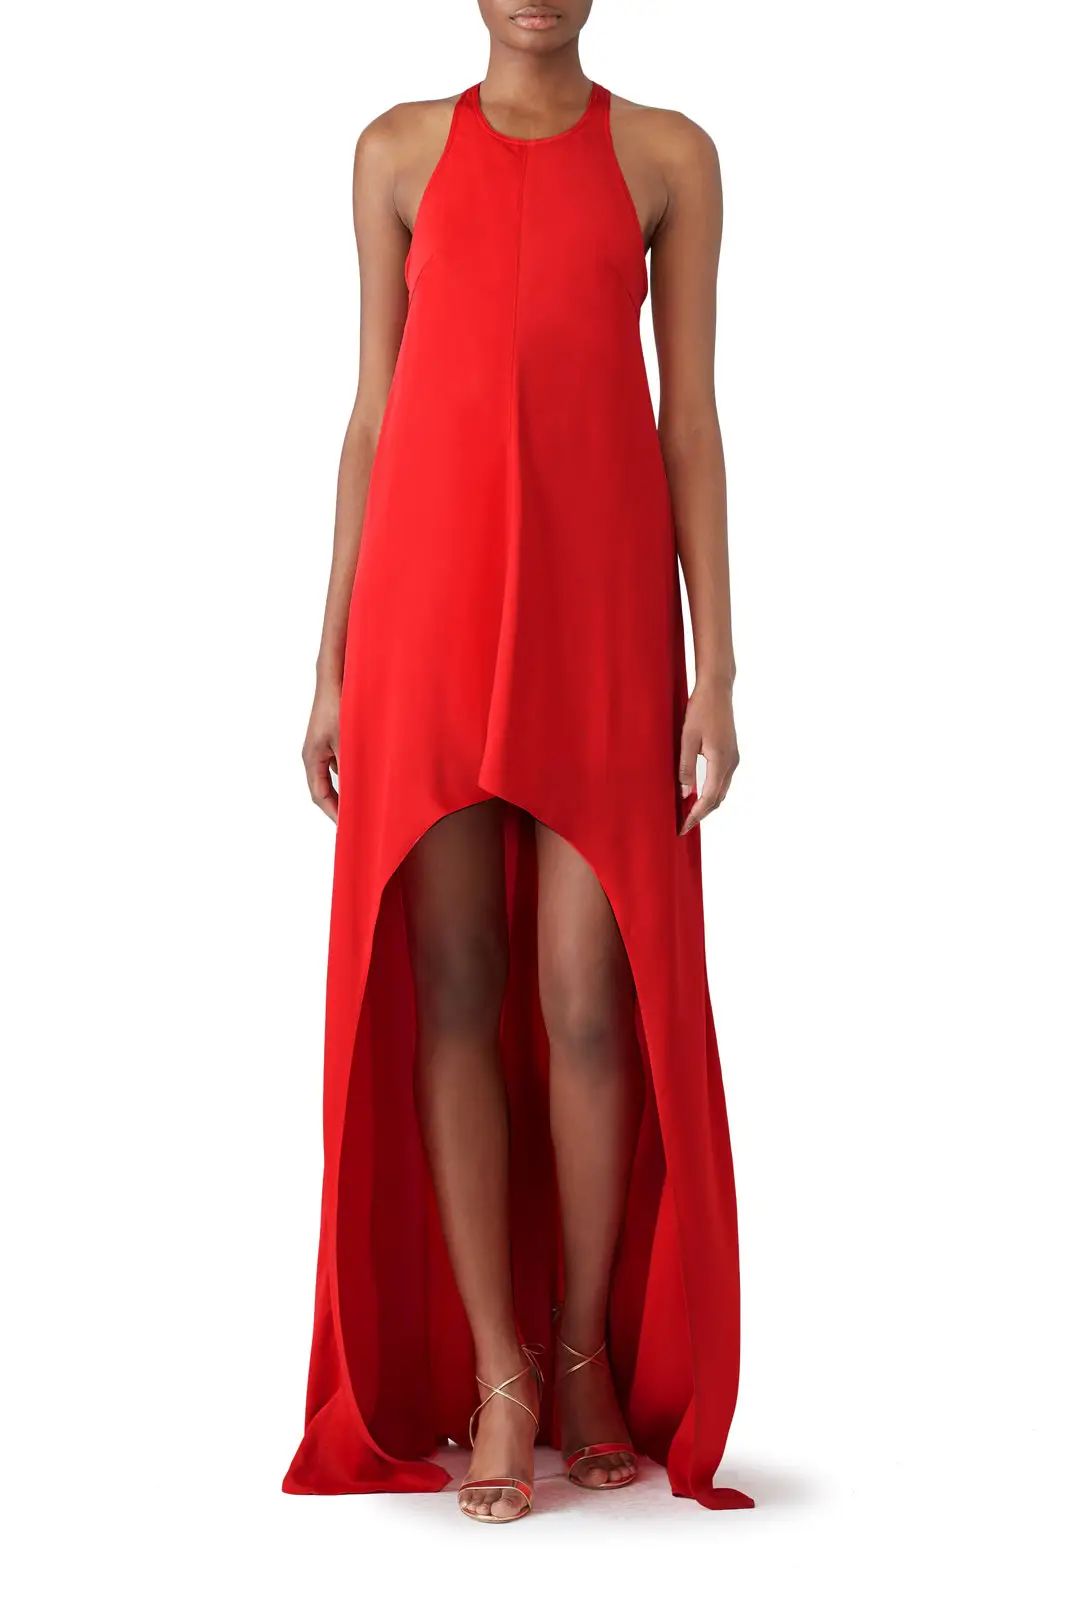 KAUFMANFRANCO Red High Low Gown | Rent The Runway